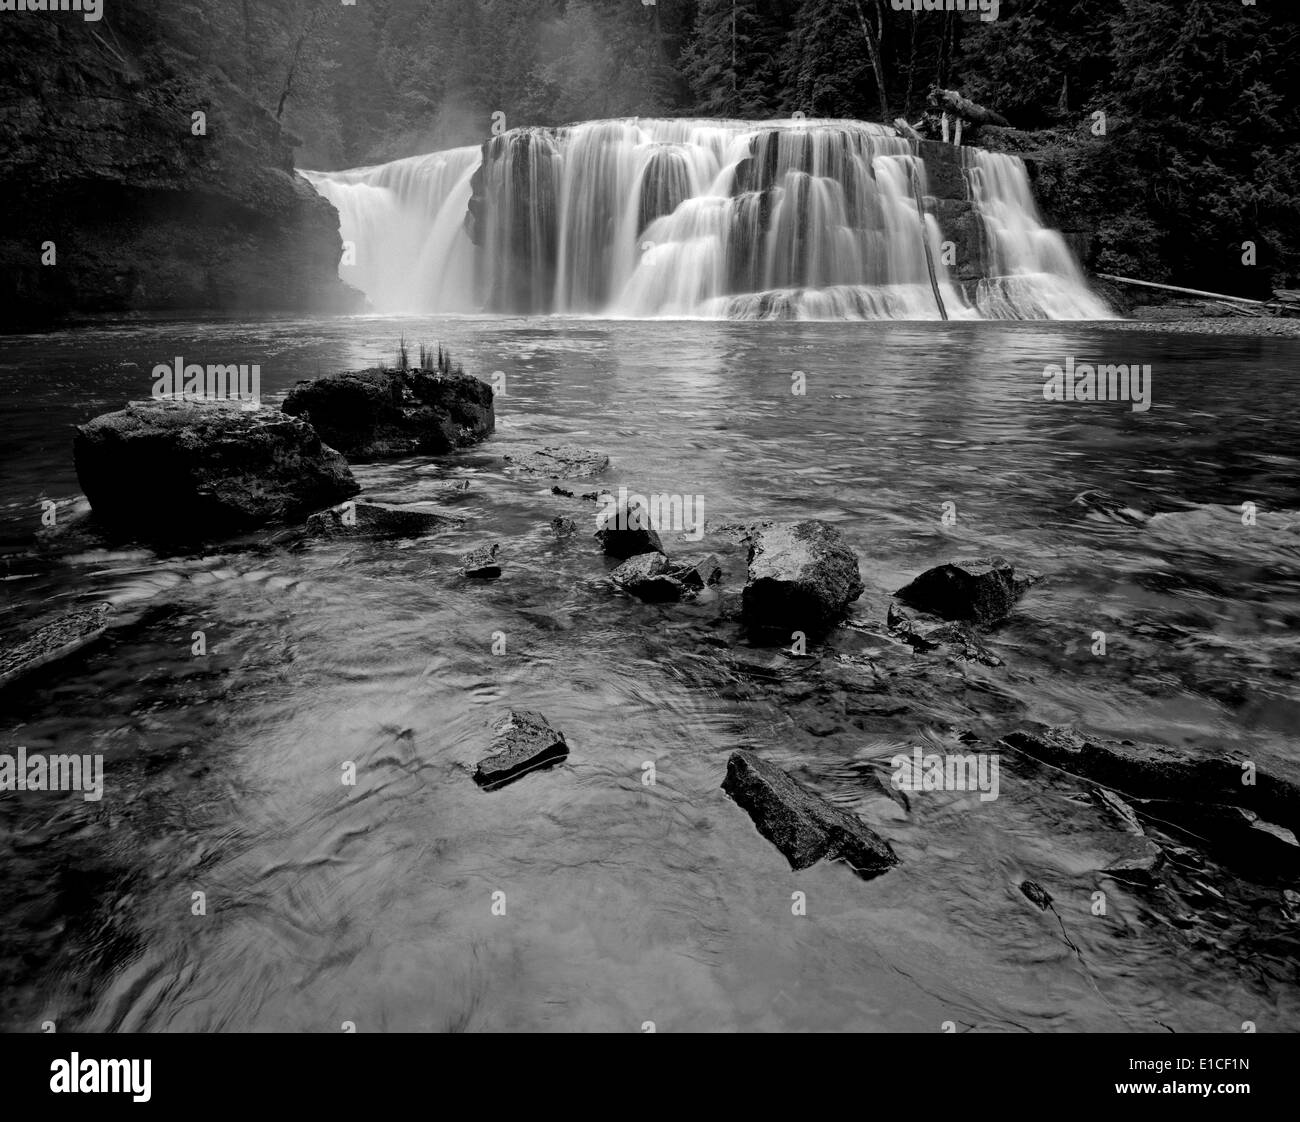 BW000522-00....WASHINGTON - Lewis River Falls à Gifford Pinchot National Forest. Banque D'Images